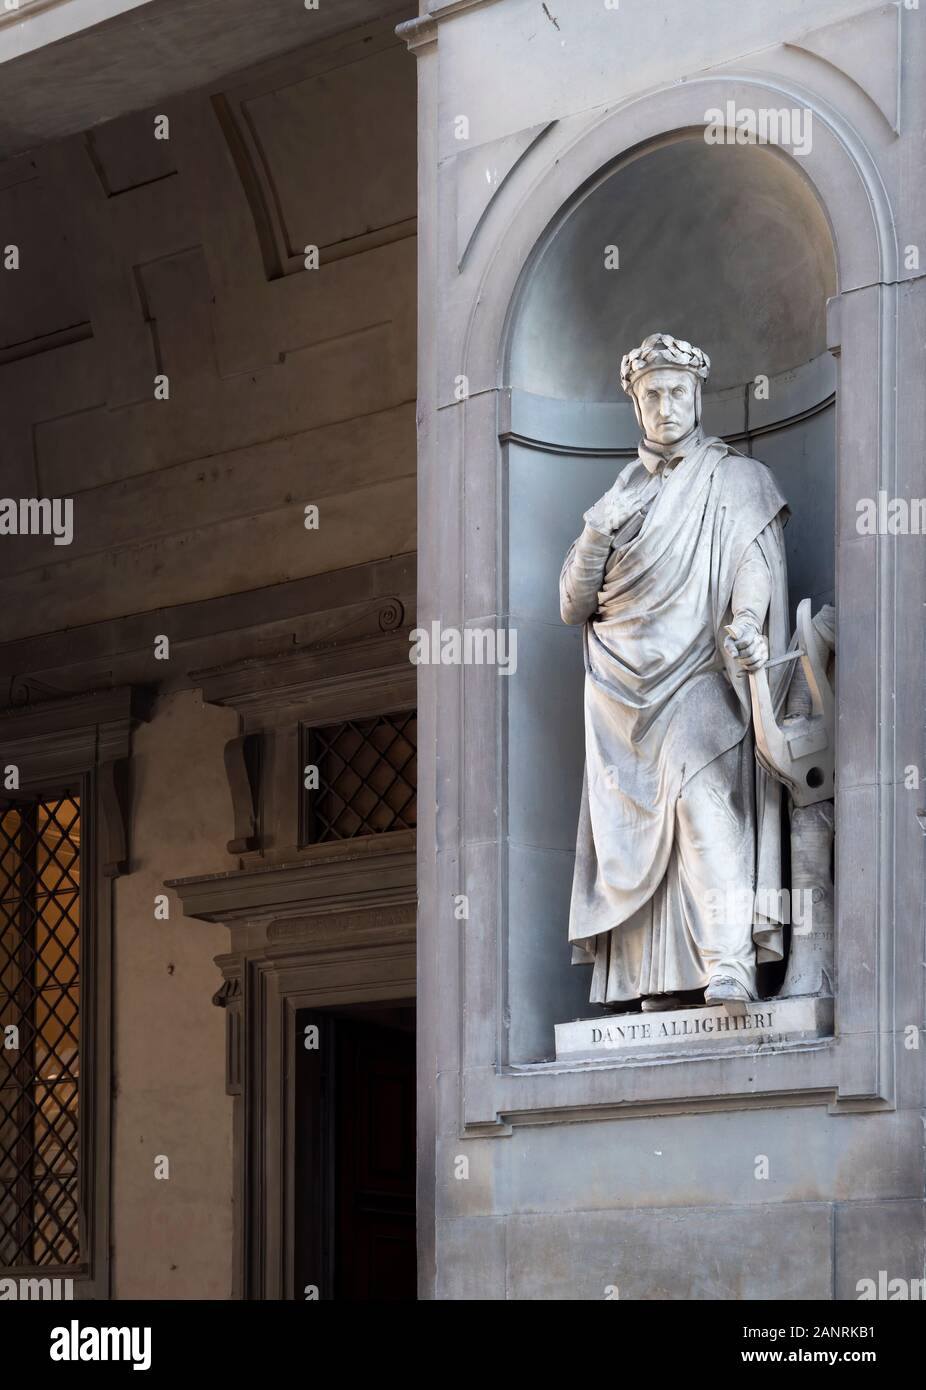 FLORENCE, ITALY, January 6, 2020: Statue of Dante Alighieri along the colonnade of the Uffizi Gallery in Florence, Italian poet. Stock Photo